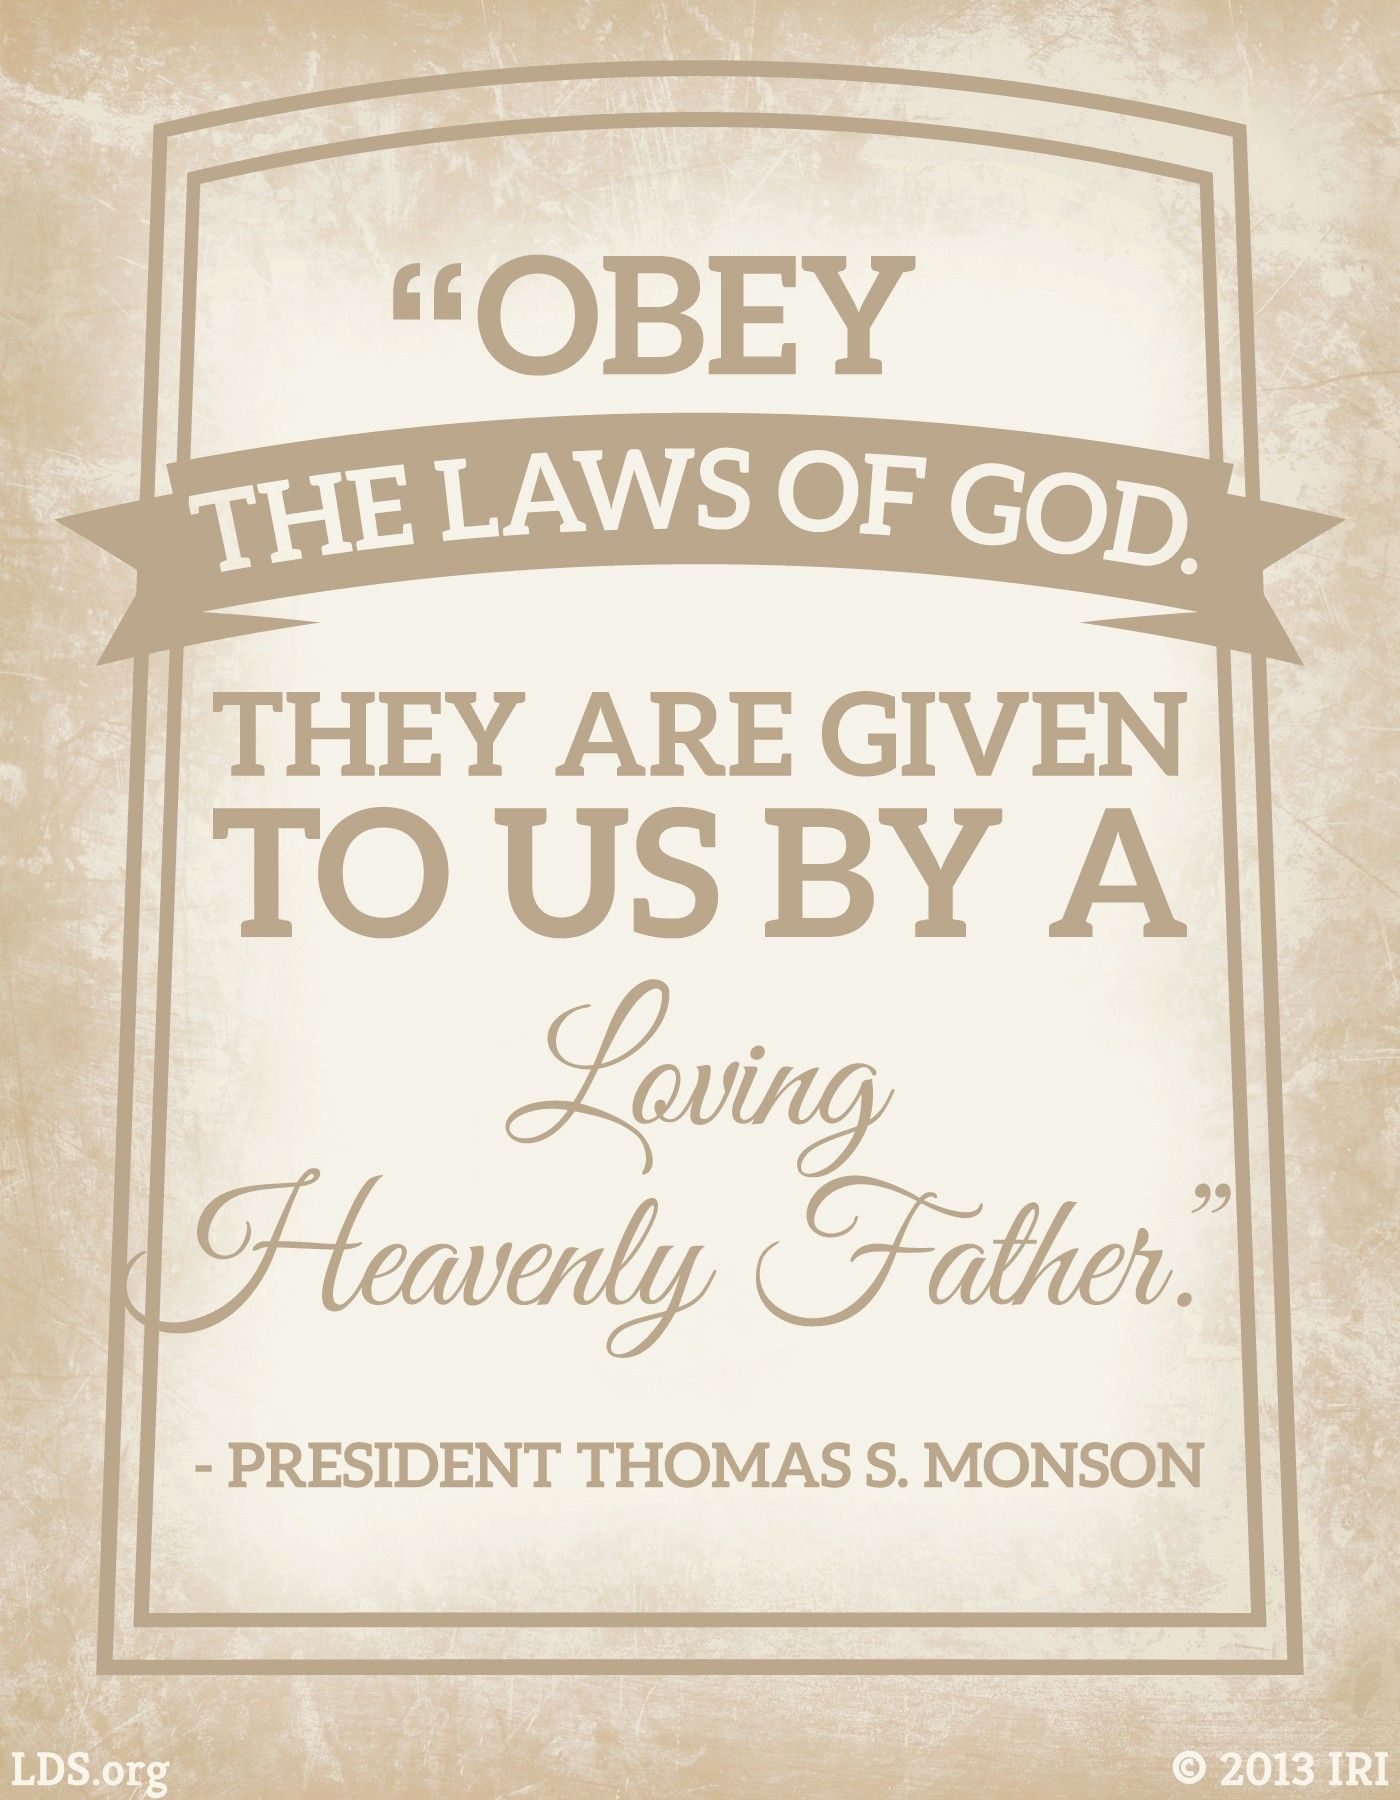 “Obey the laws of God. They are given to us by a loving Heavenly Father.”—President Thomas S. Monson, “Believe, Obey, and Endure”